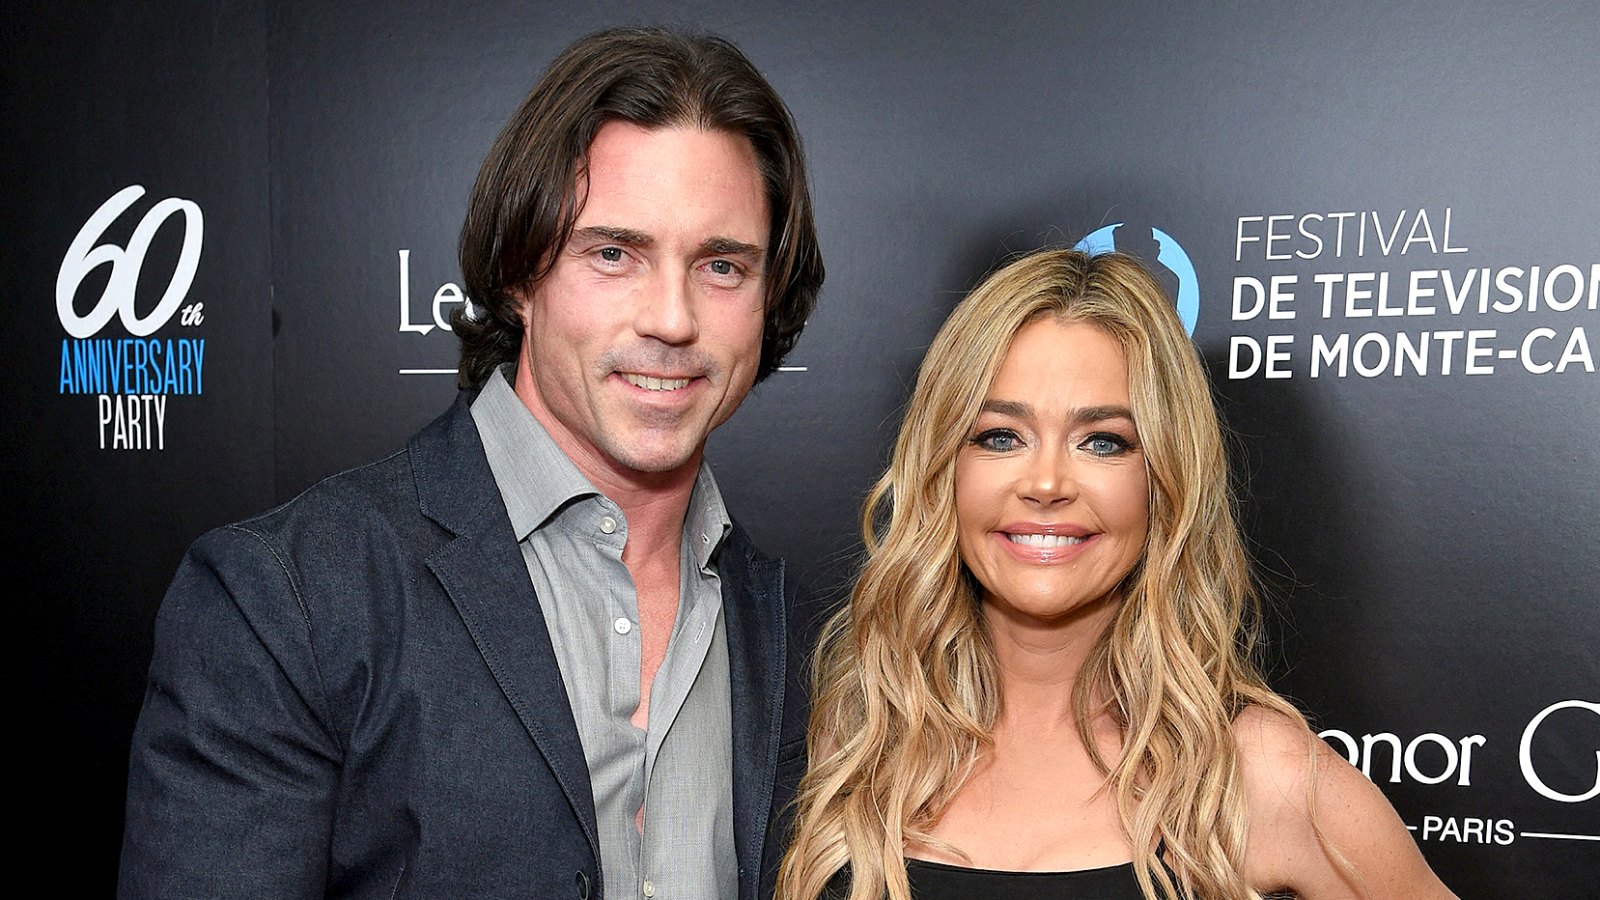 Denise Richards Reveals She and Aaron Phypers Spent One Weekend a Month Away From Kids to Reconnect